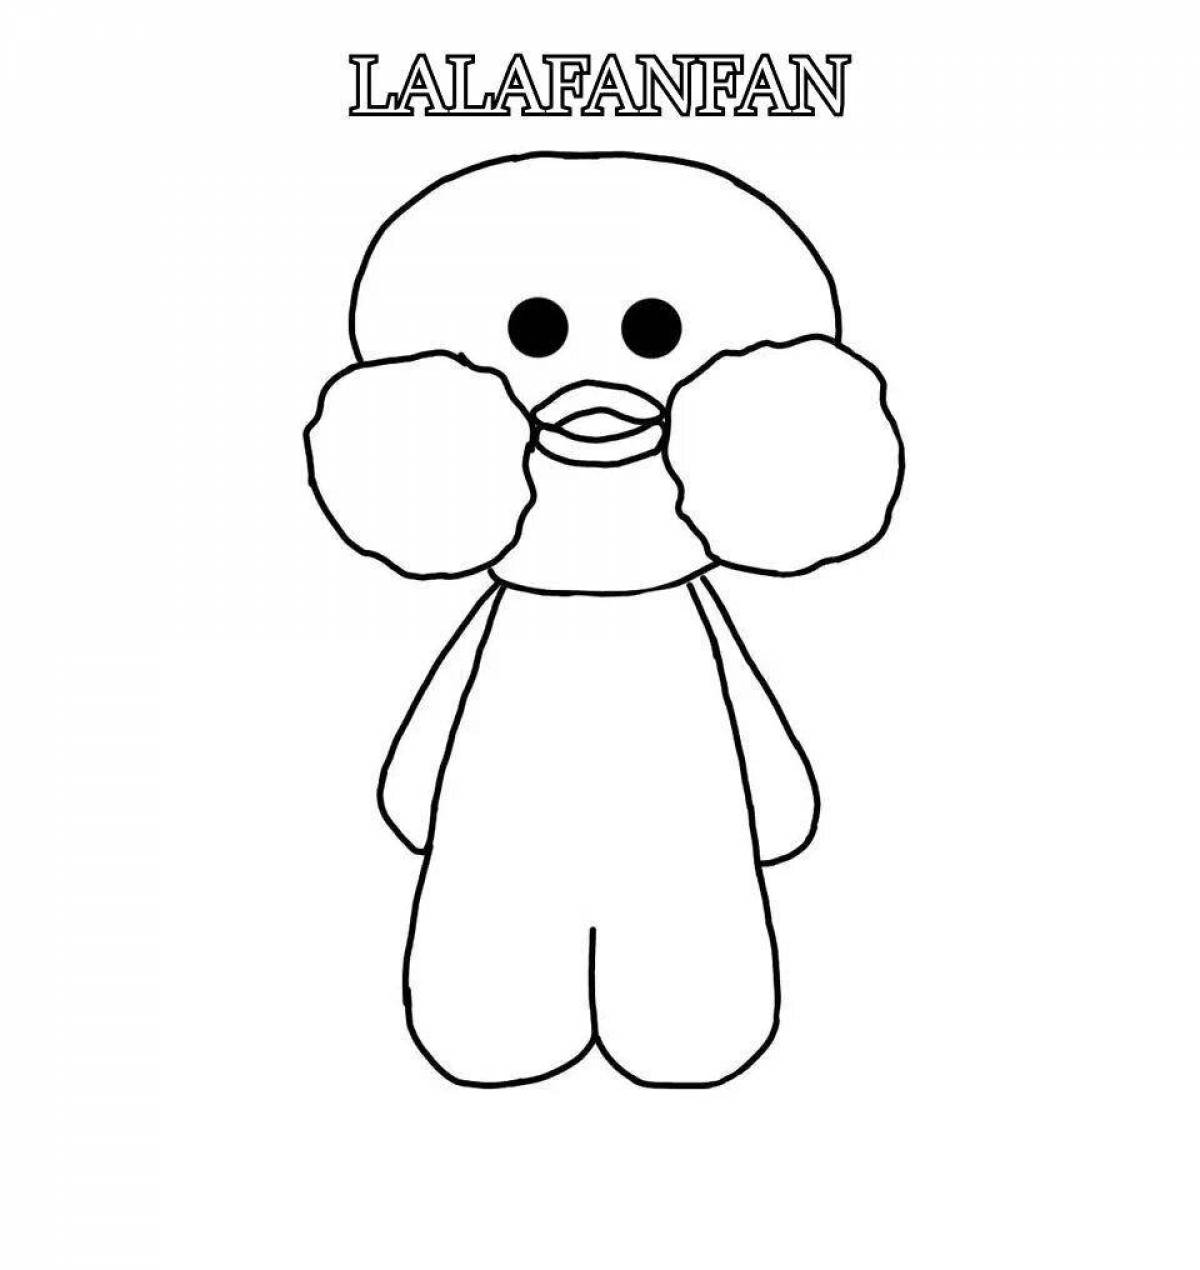 Lalalafanfan glowing duck coloring page